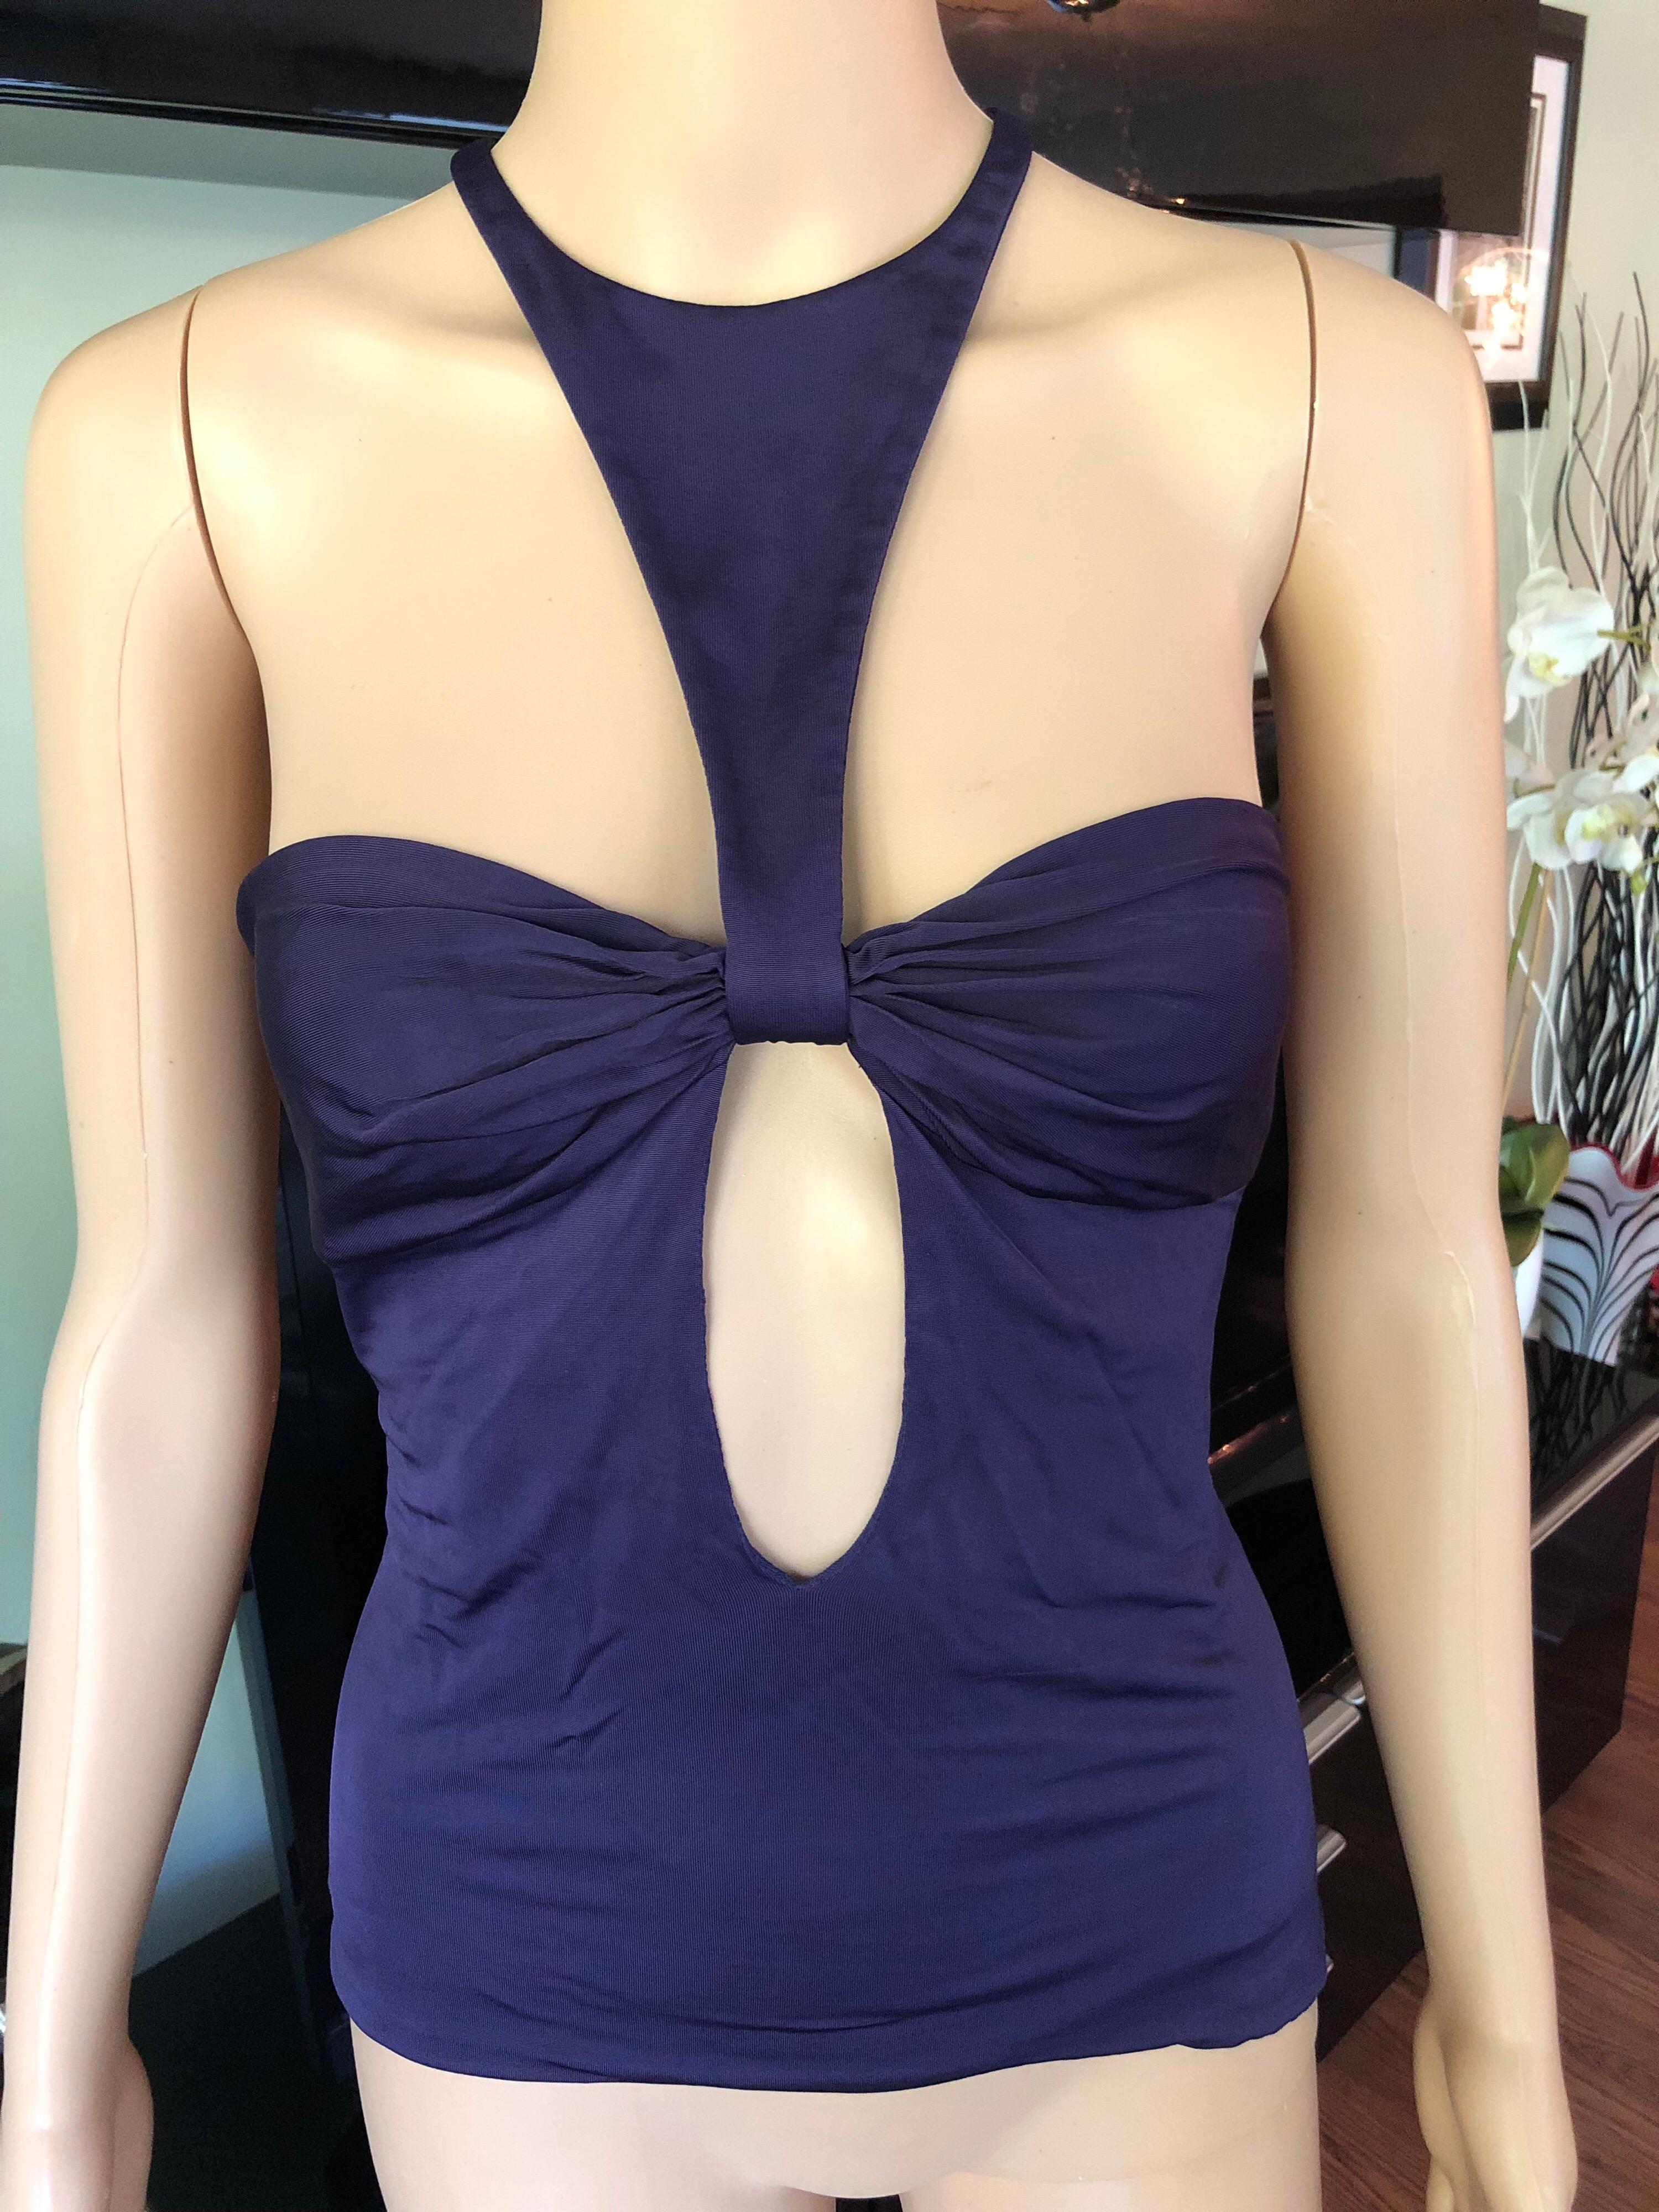 Tom Ford for Gucci F/W 2004 Cut-Out Top IT 44

Purple Gucci sleeveless top featuring plunging neckline, keyhole at front and back and concealed zip closure at side.
